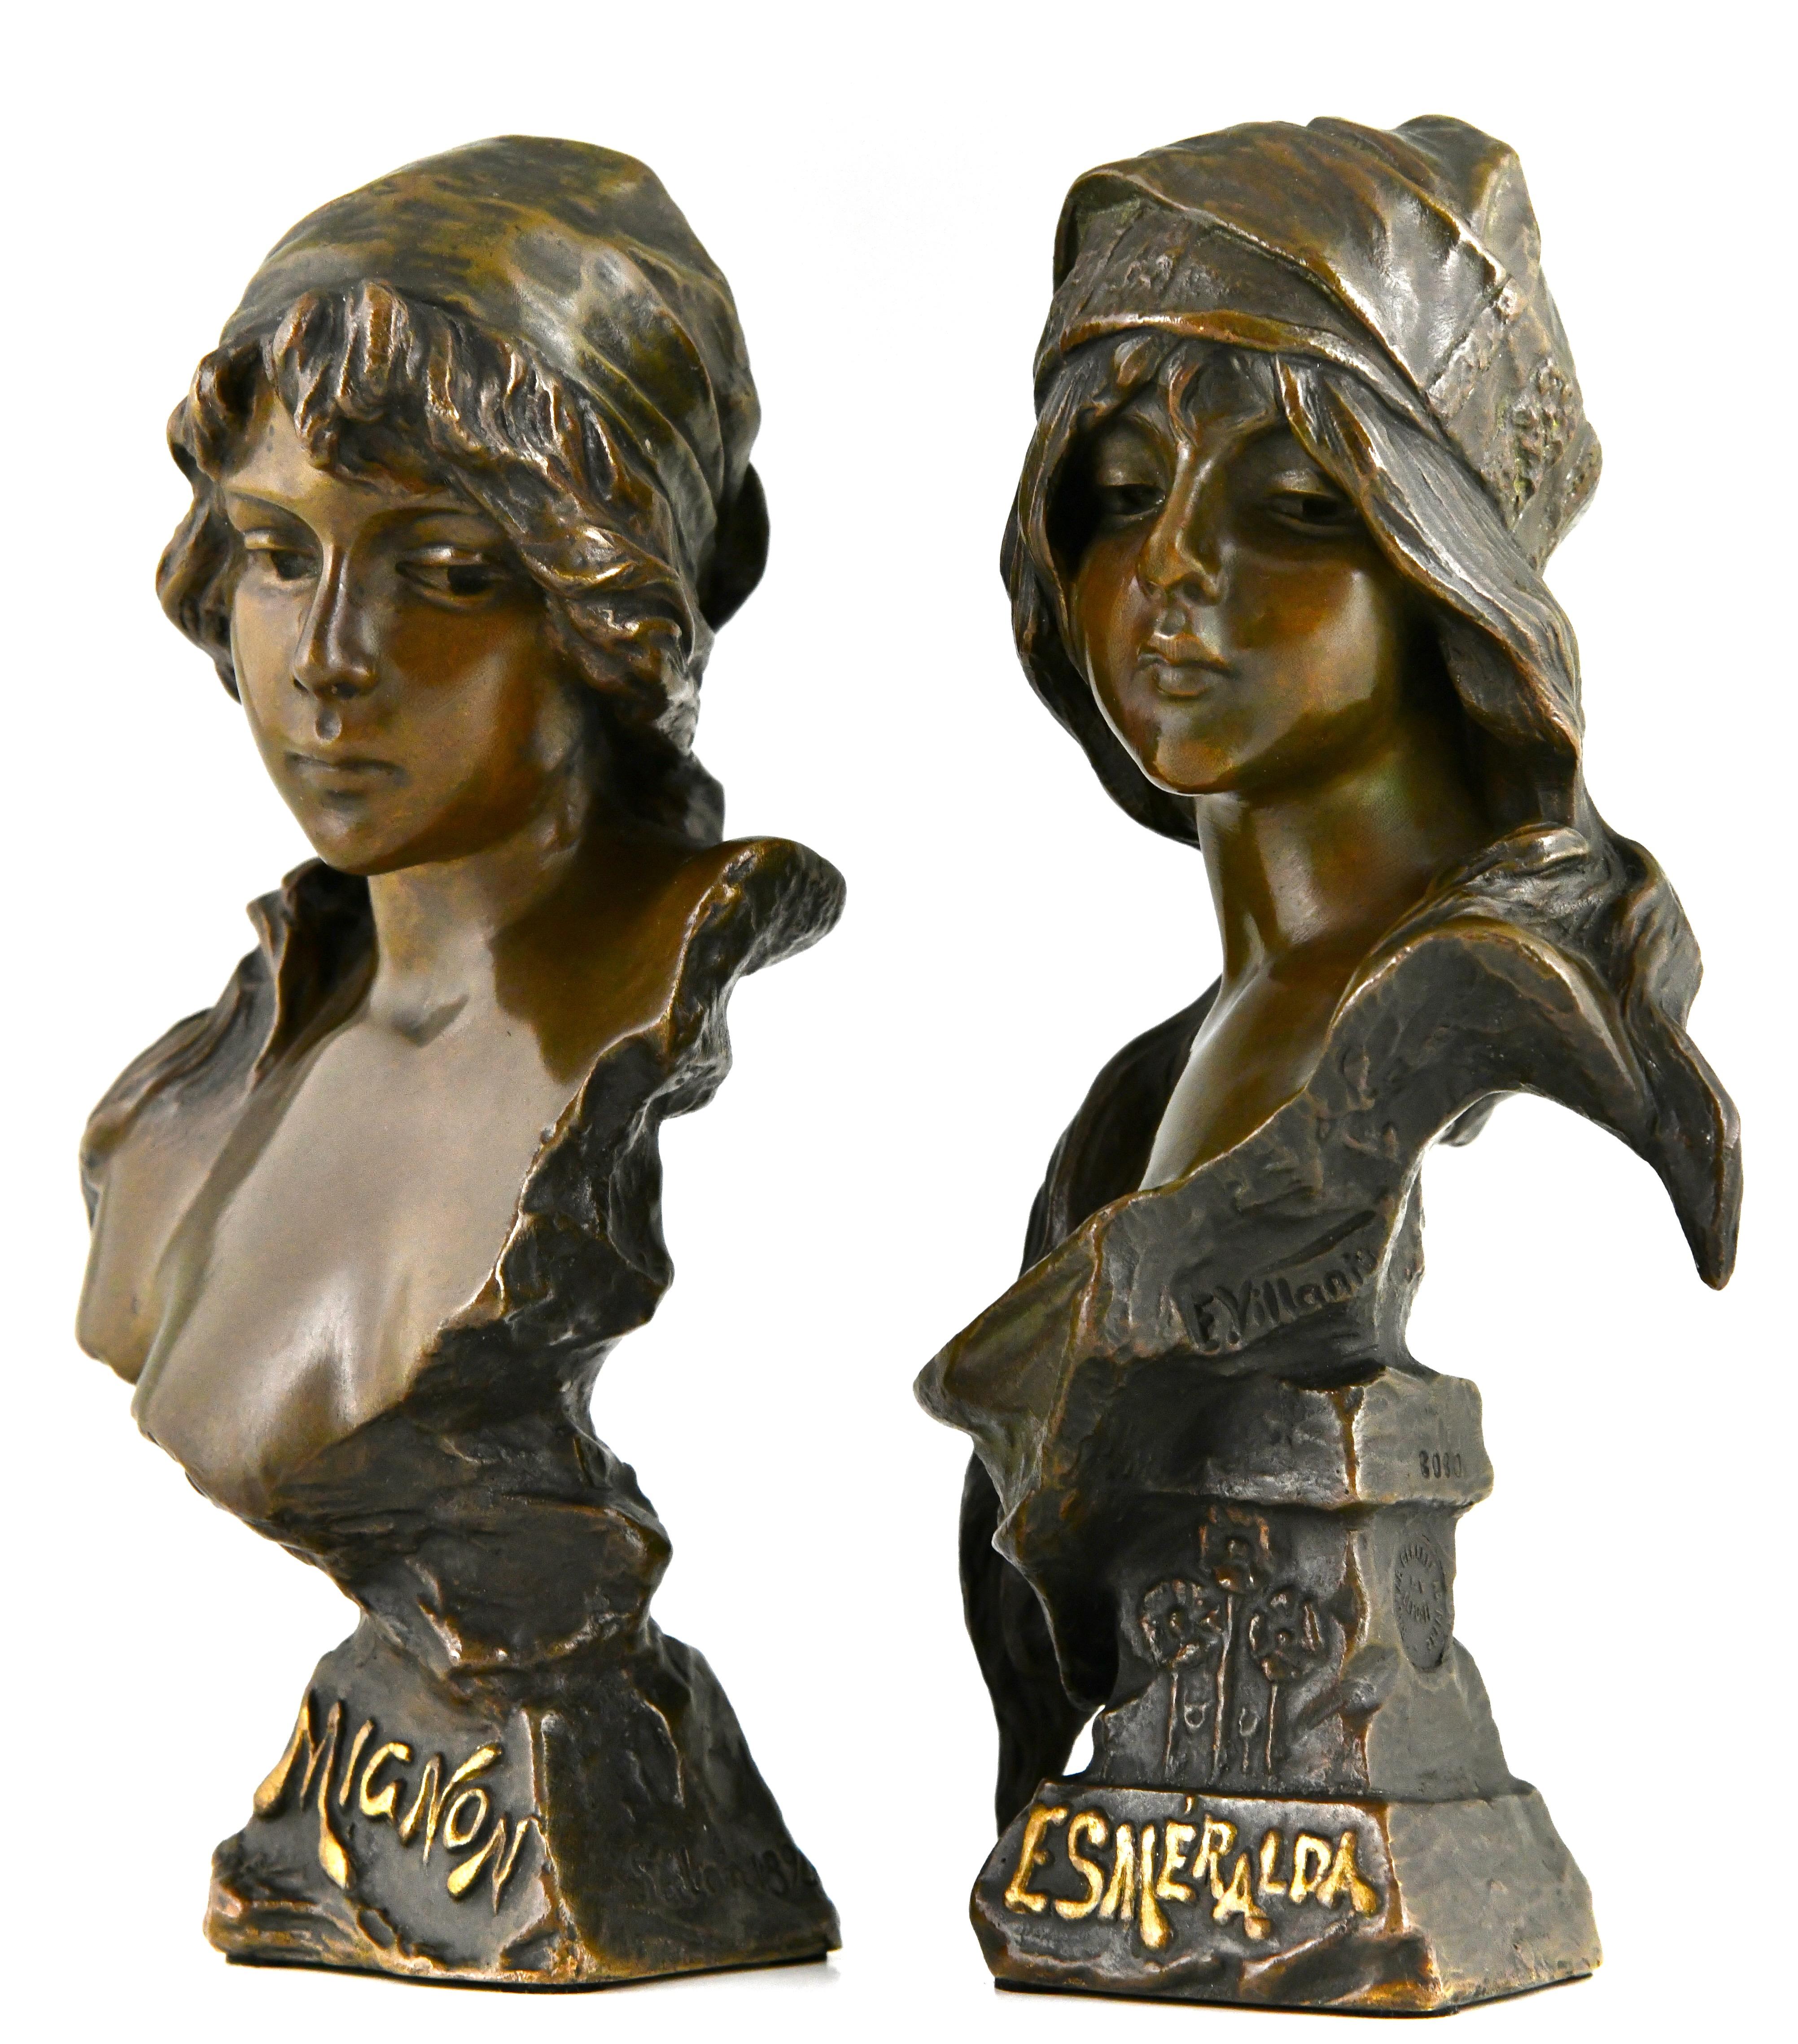 Pair of Art Nouveau bronze busts of a young woman Mignon and Esmeralda by Emmanuel Villanis. 
Both with beautiful patina and foundry mark.
France 1896.  
Mignon:
E. Villanis, initials of the founder LU, numbered. 
Exhibited at the Salon of 1896.